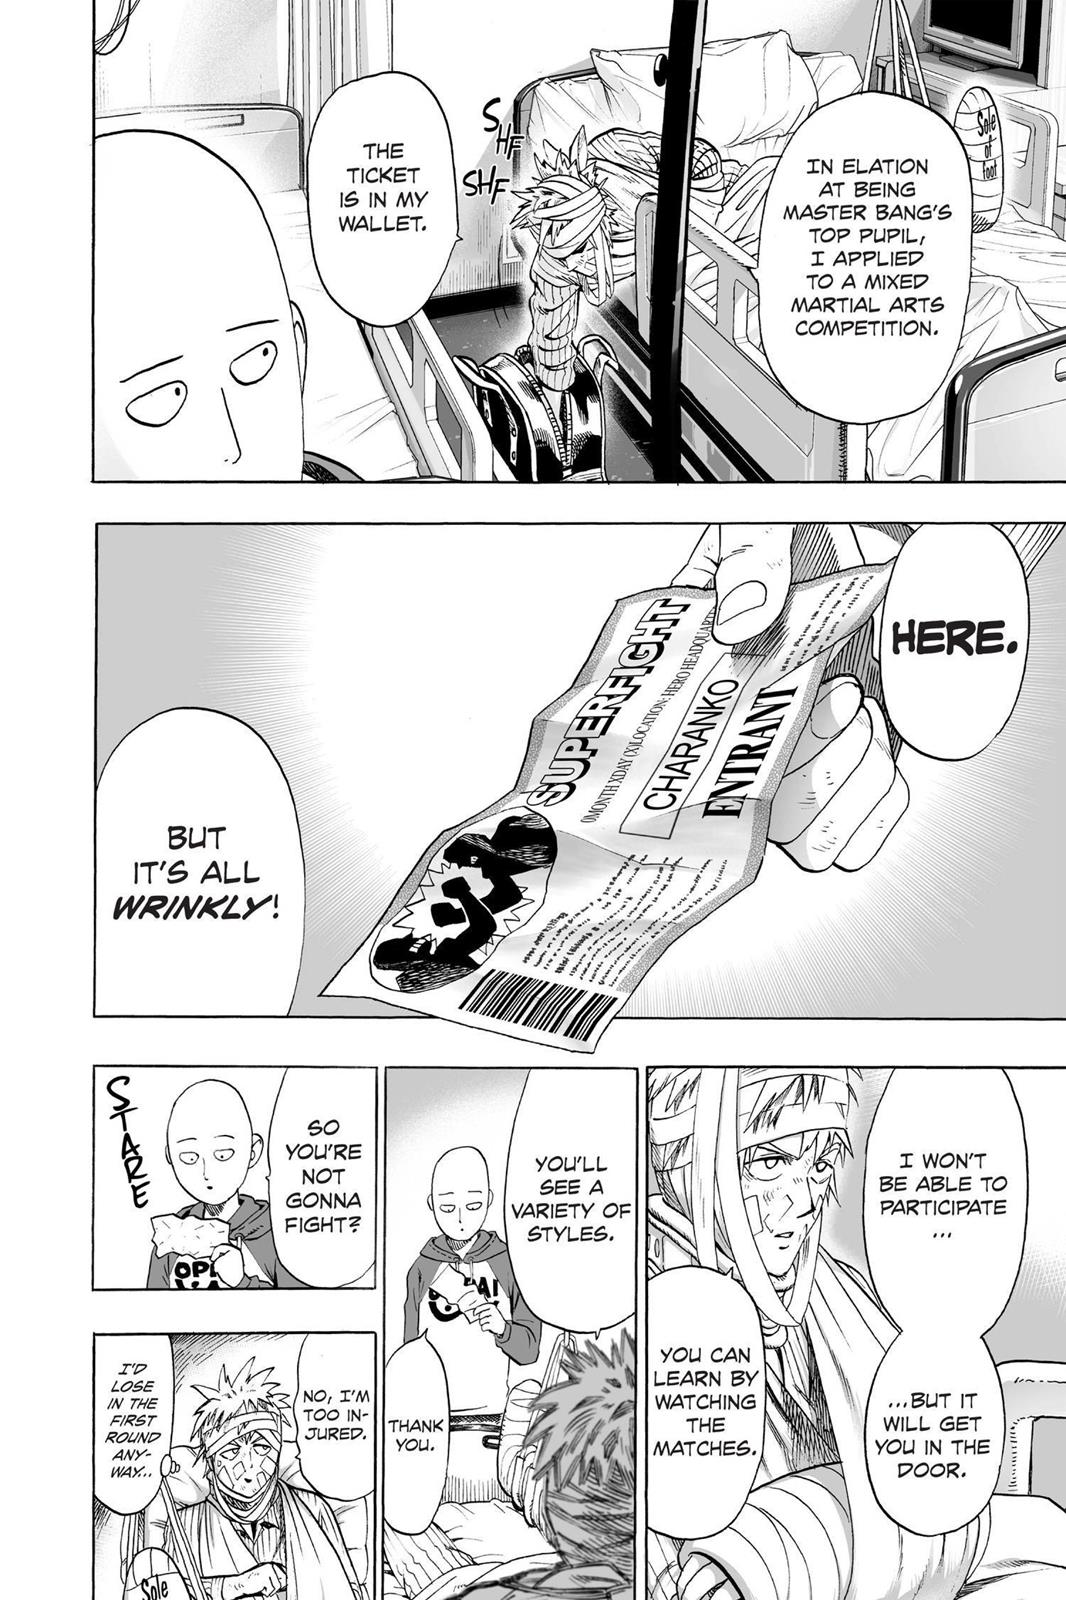 One-Punch Man, Punch 49 image 11